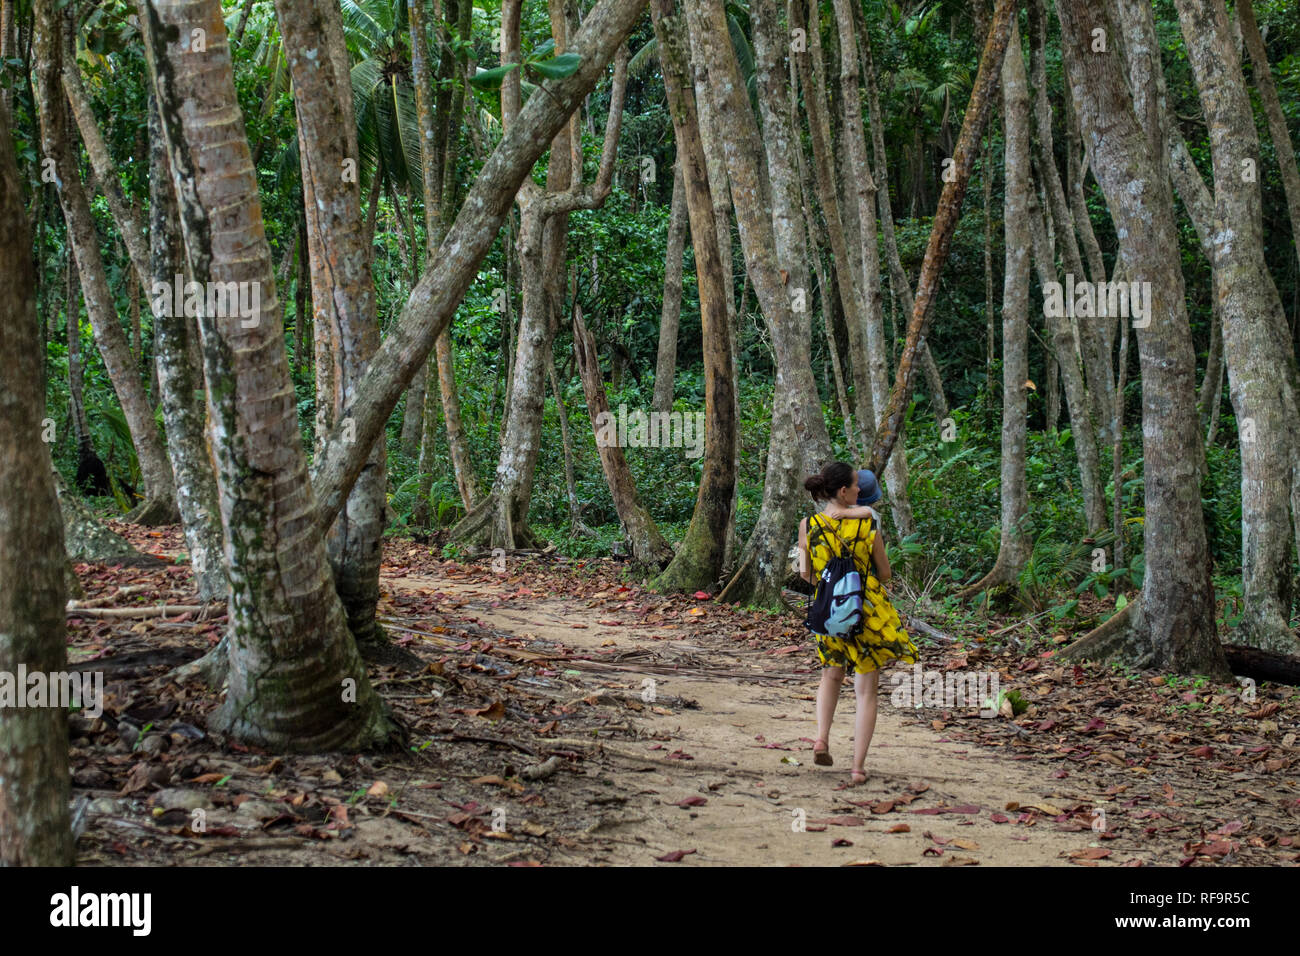 A woman walking in a beautiful ancient looking tropical rain forest at Manzanillo National Park, Costa Rica Stock Photo